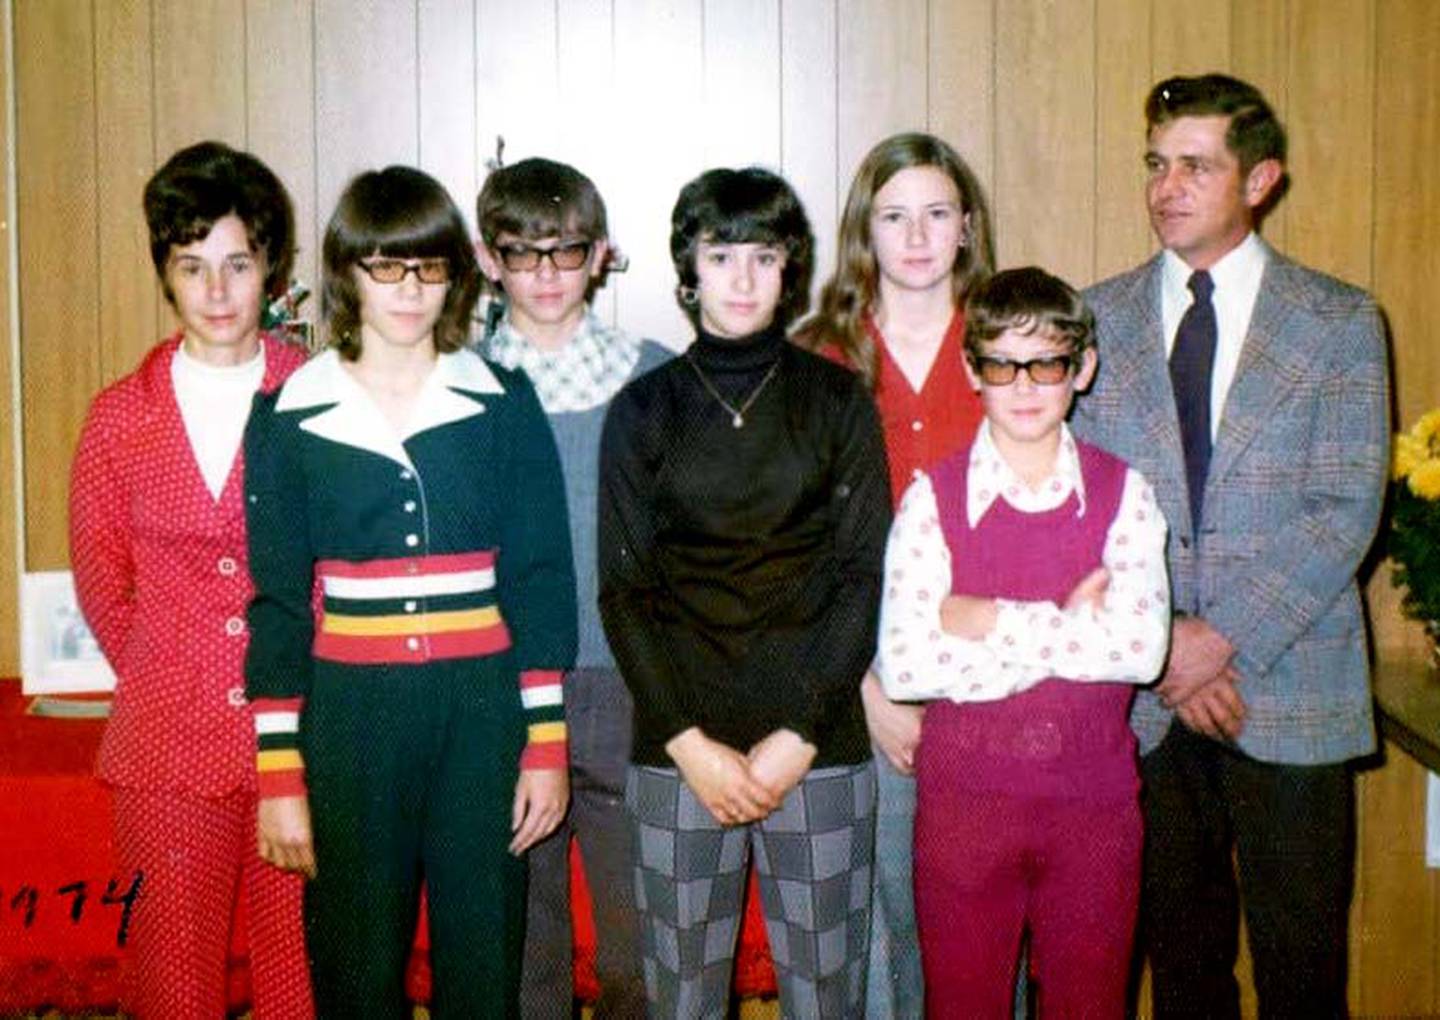 Lois and Fritz Weis of Afton stand with their five children in 1974. Pictured from left, Lois, Jill, Gregory, Pam, Teresa, Mark and Fritz.